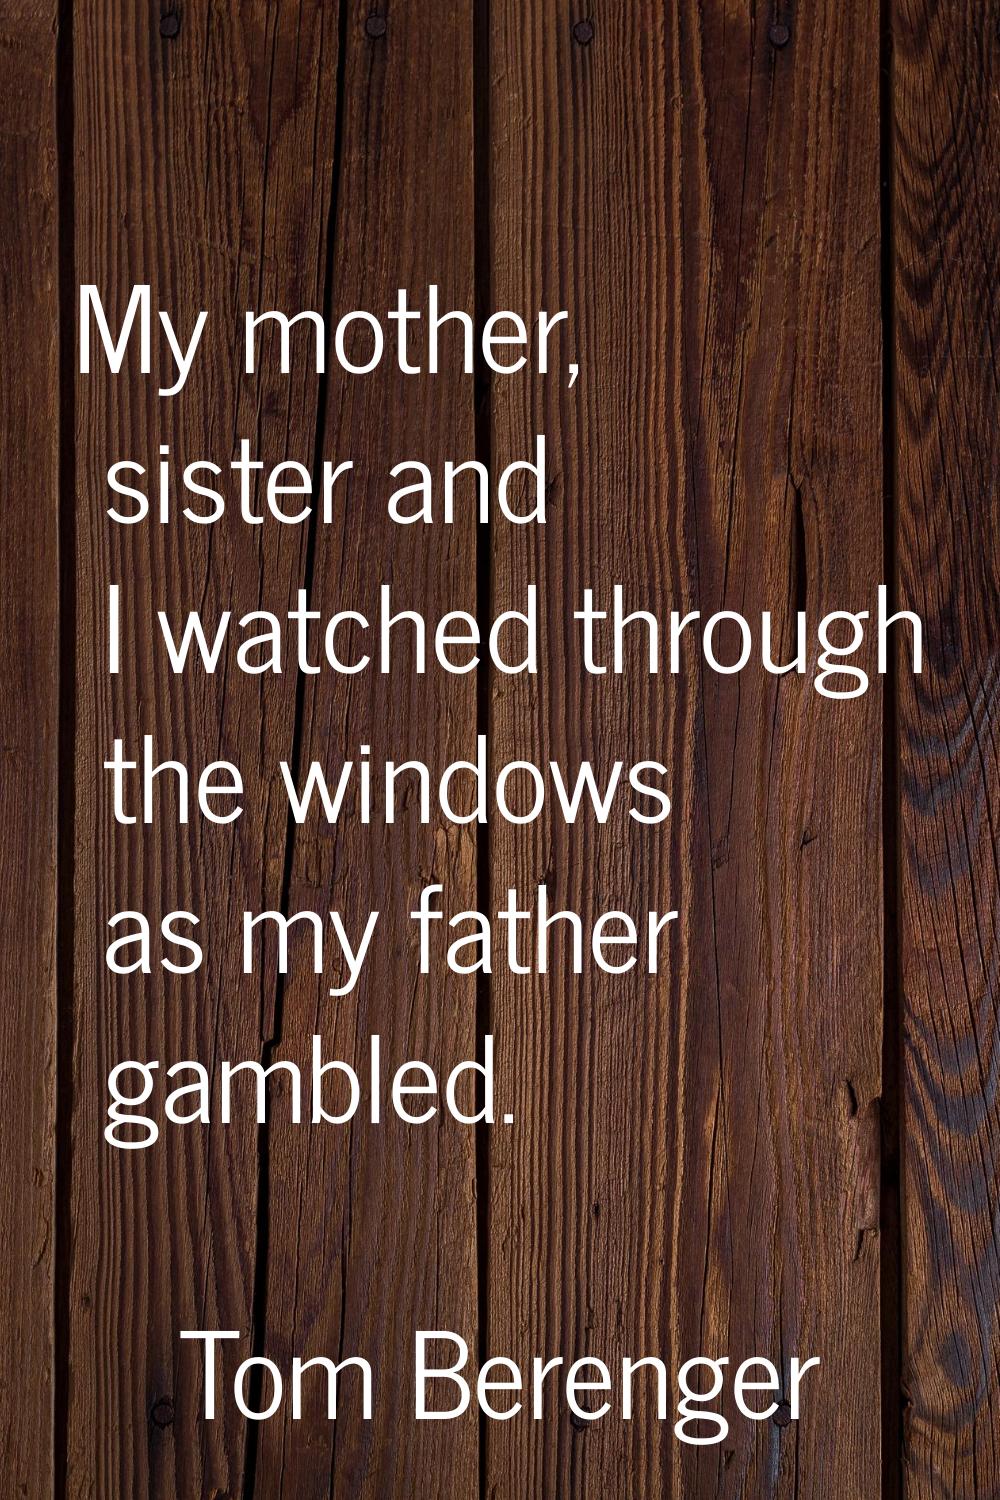 My mother, sister and I watched through the windows as my father gambled.